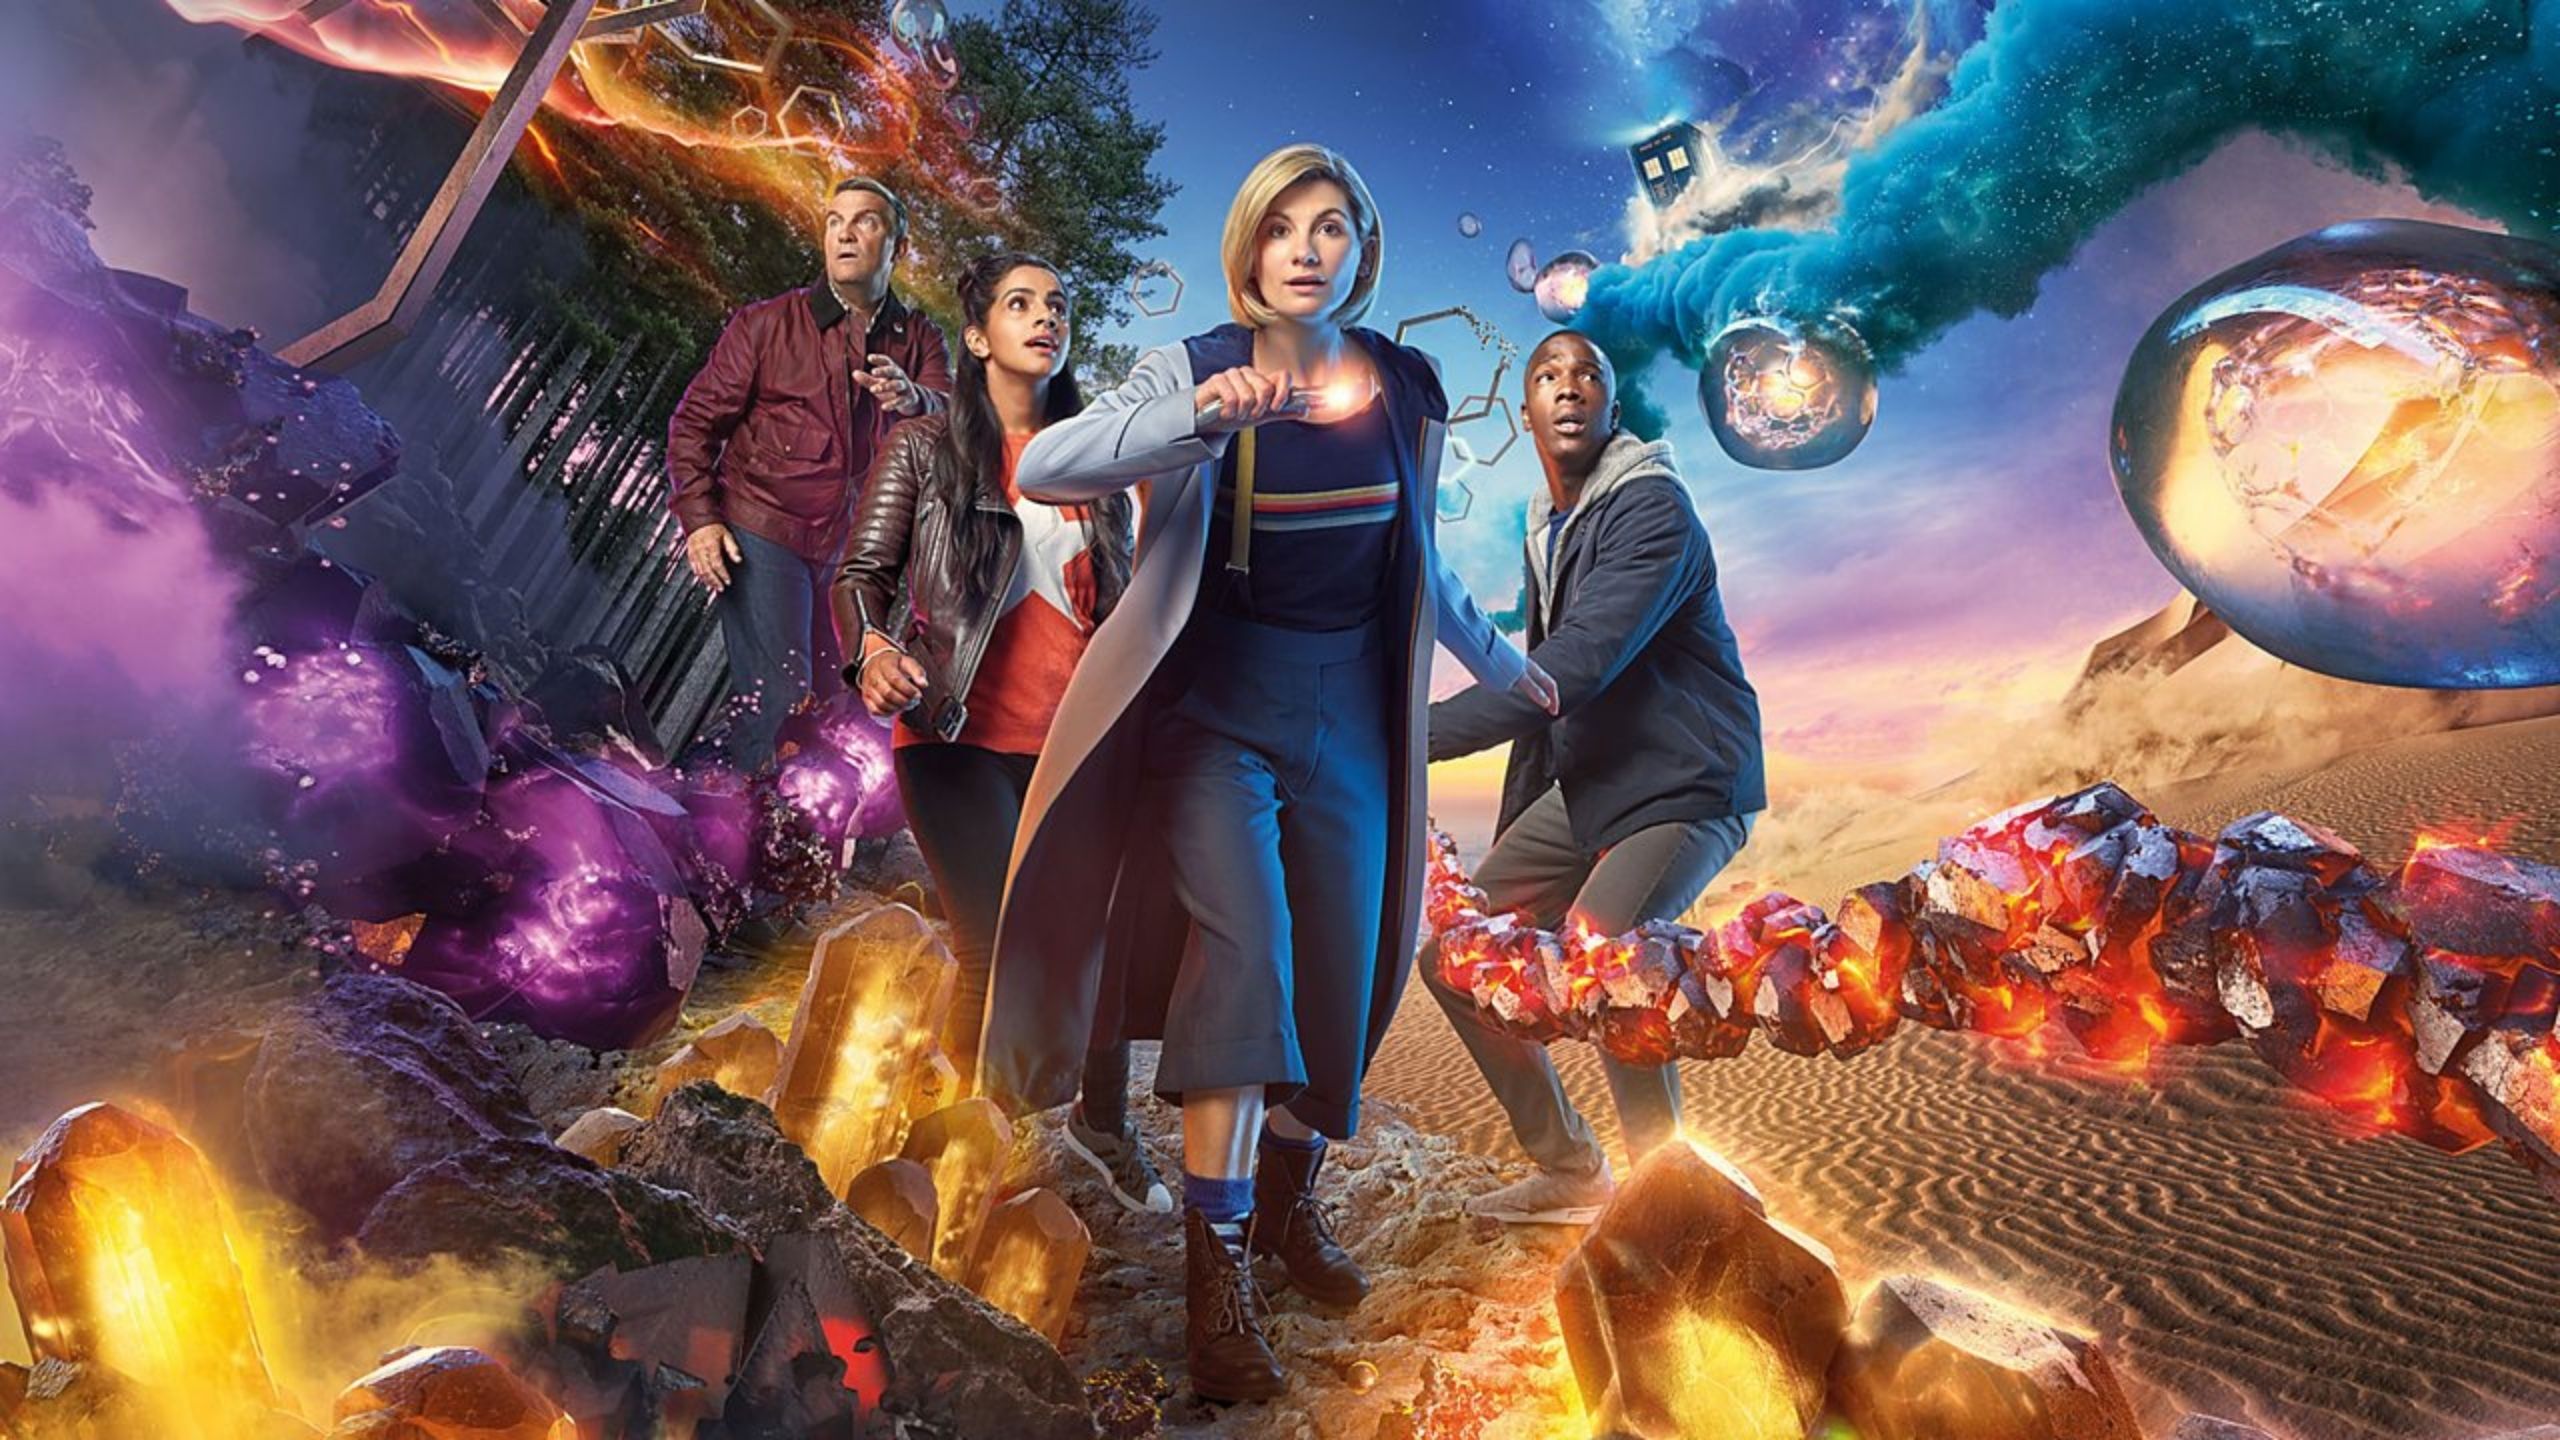 The doctor and her companions in the time vortex